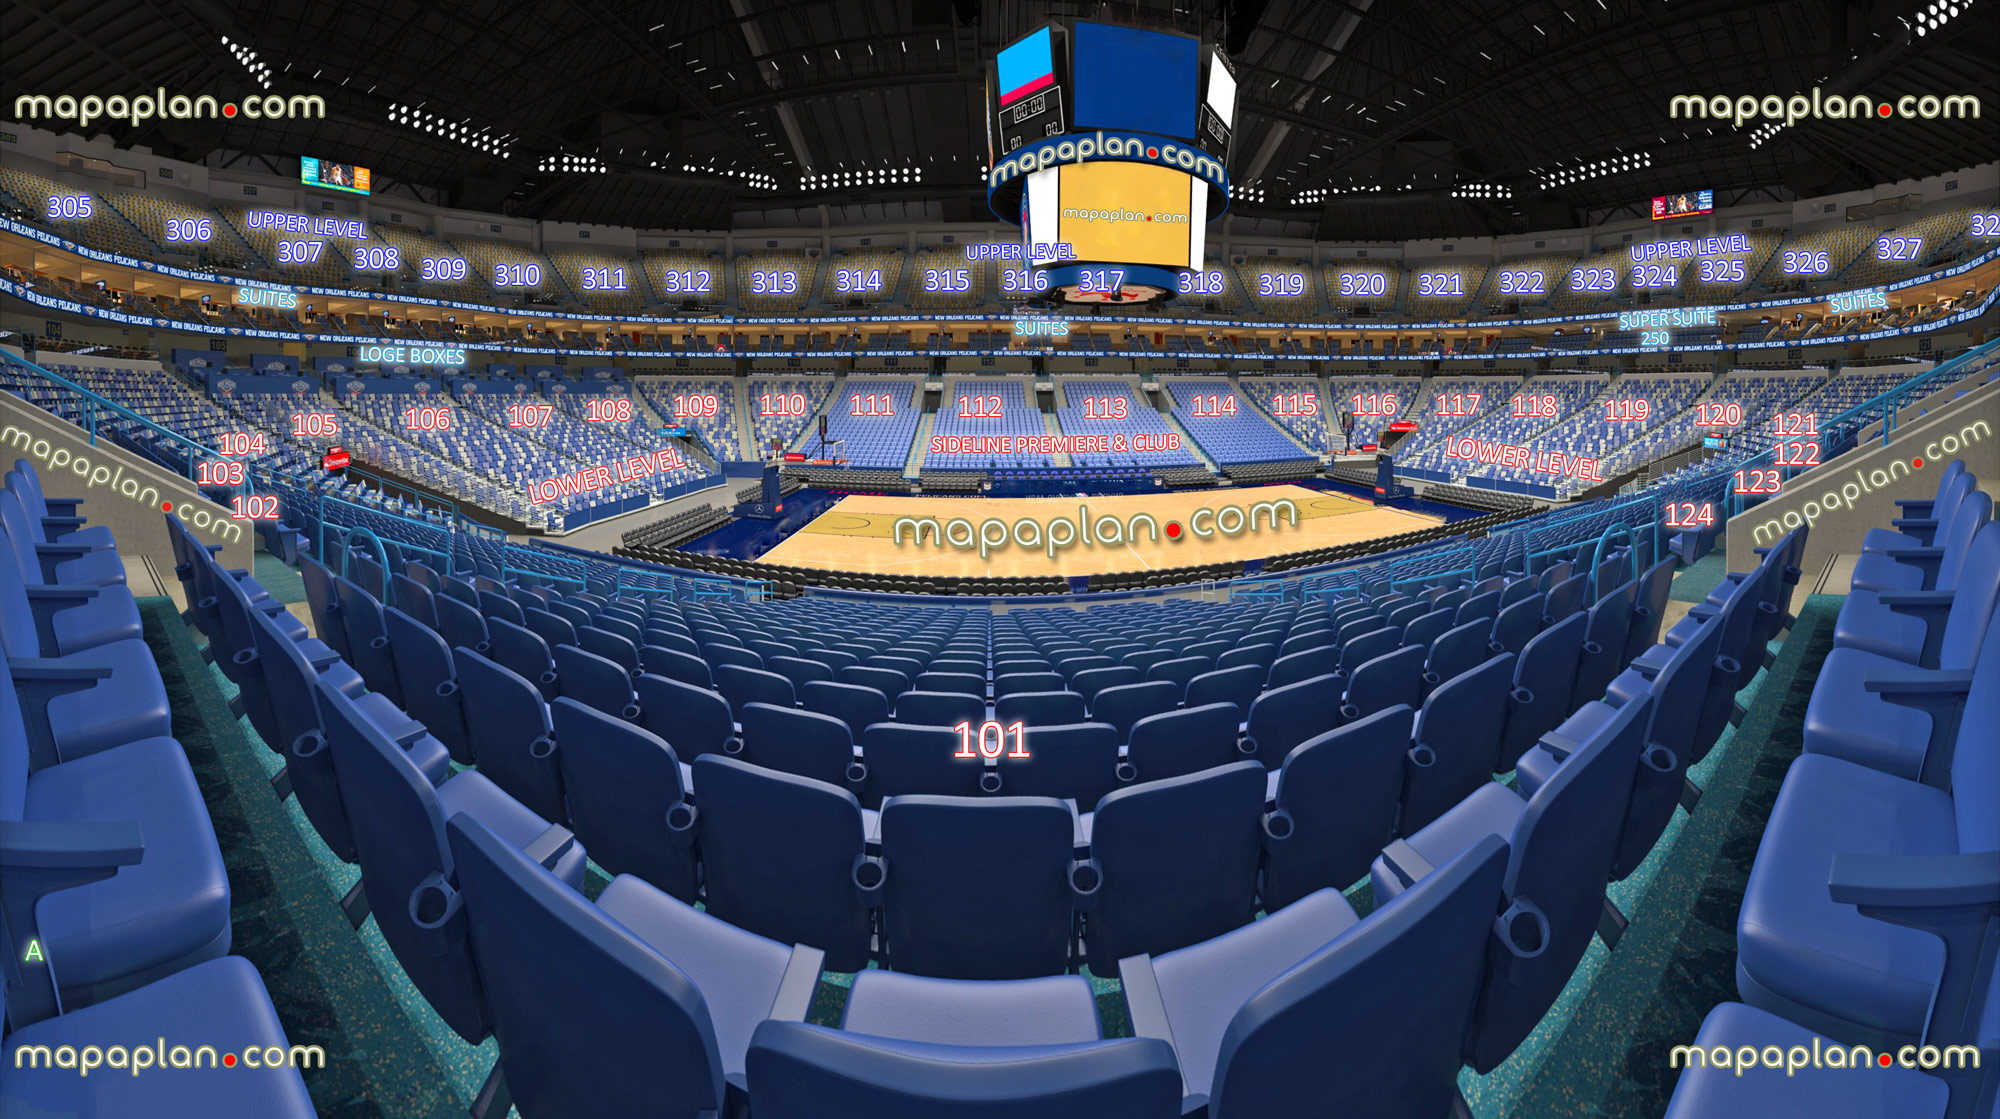 Pelicans Seating Chart With Seat Numbers